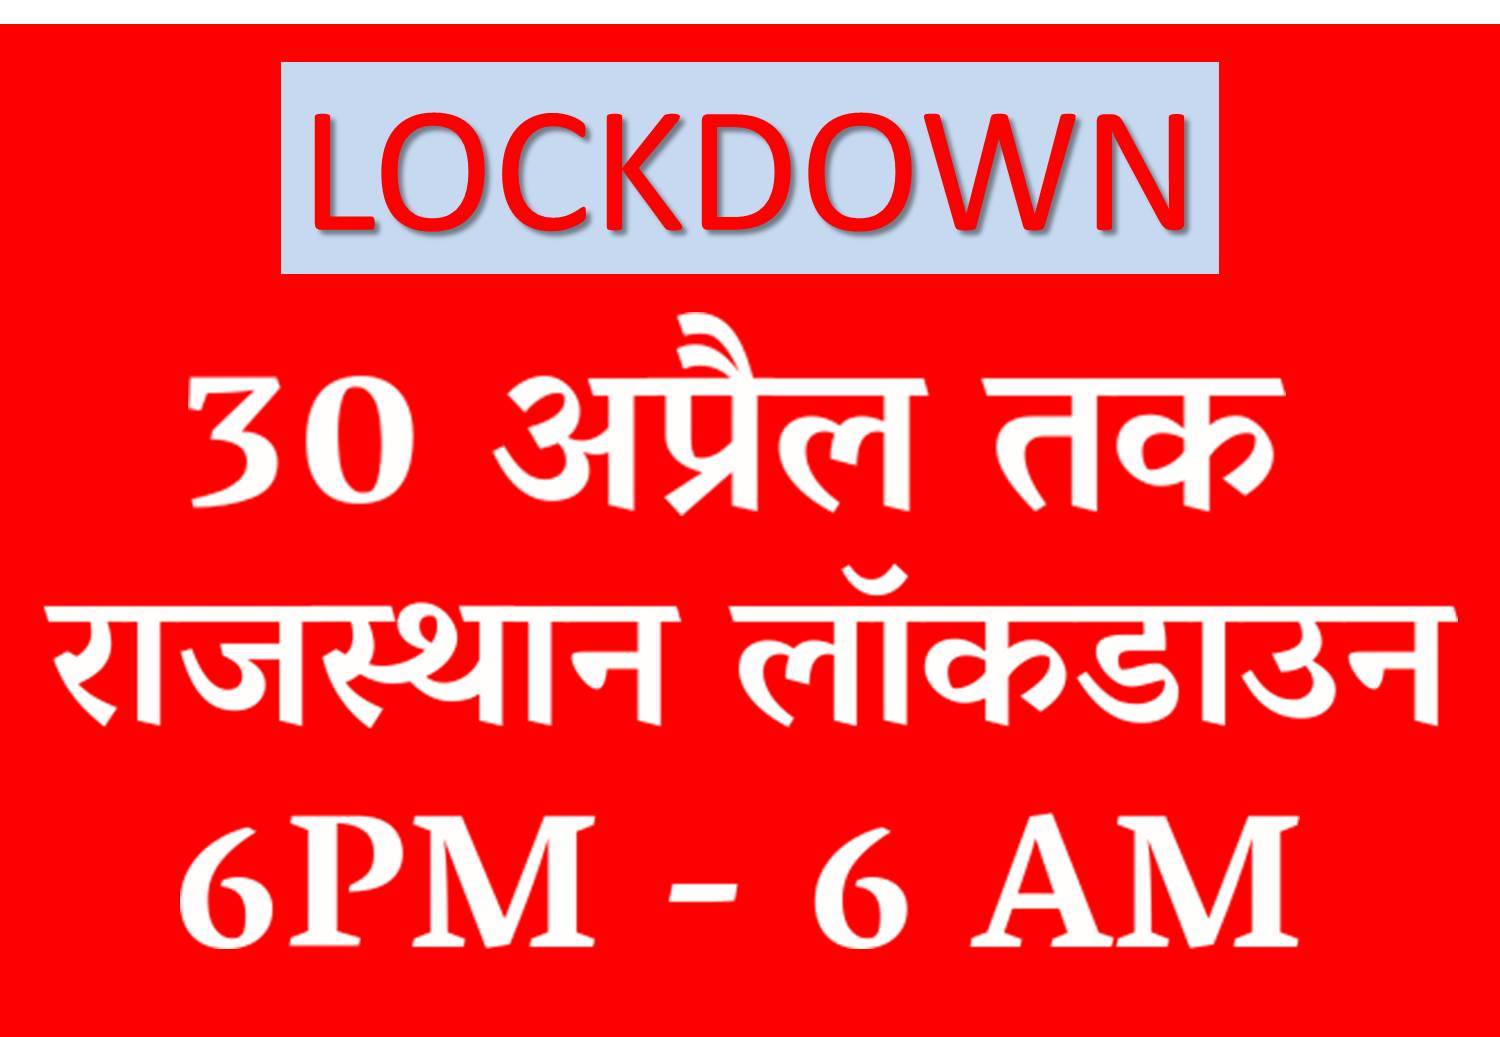 COVID Alert across Rajasthan - Government announces statewide lockdown from 6pm to 6am till 30 April